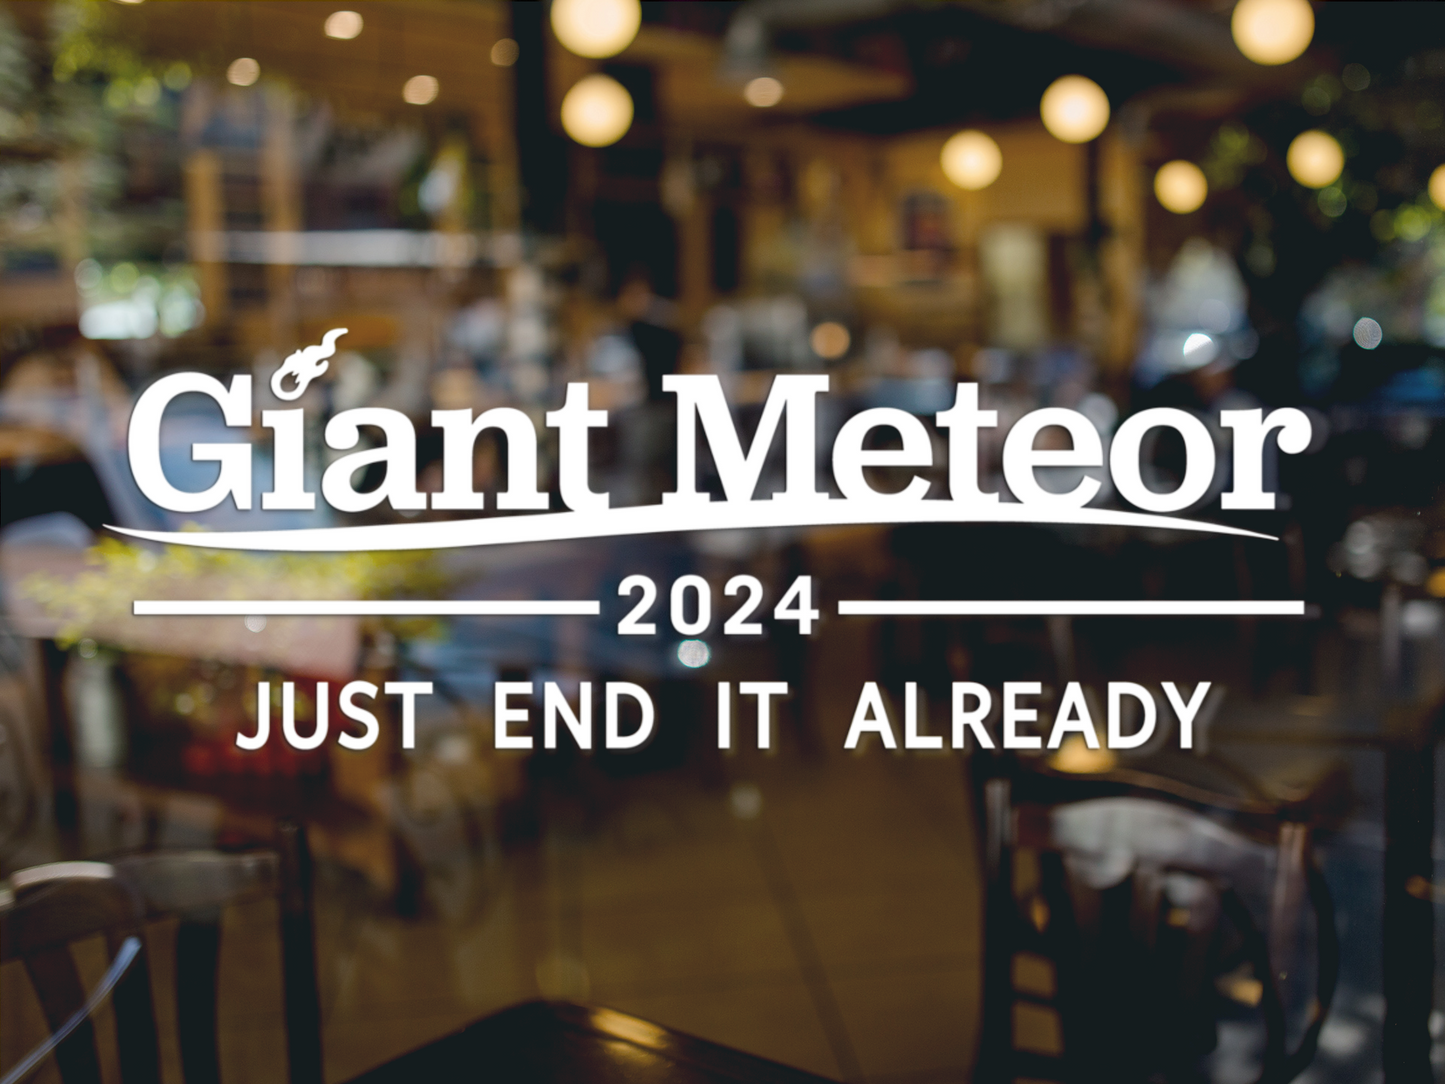 Giant Meteor 2024 Car Window Decal, Just End It Already